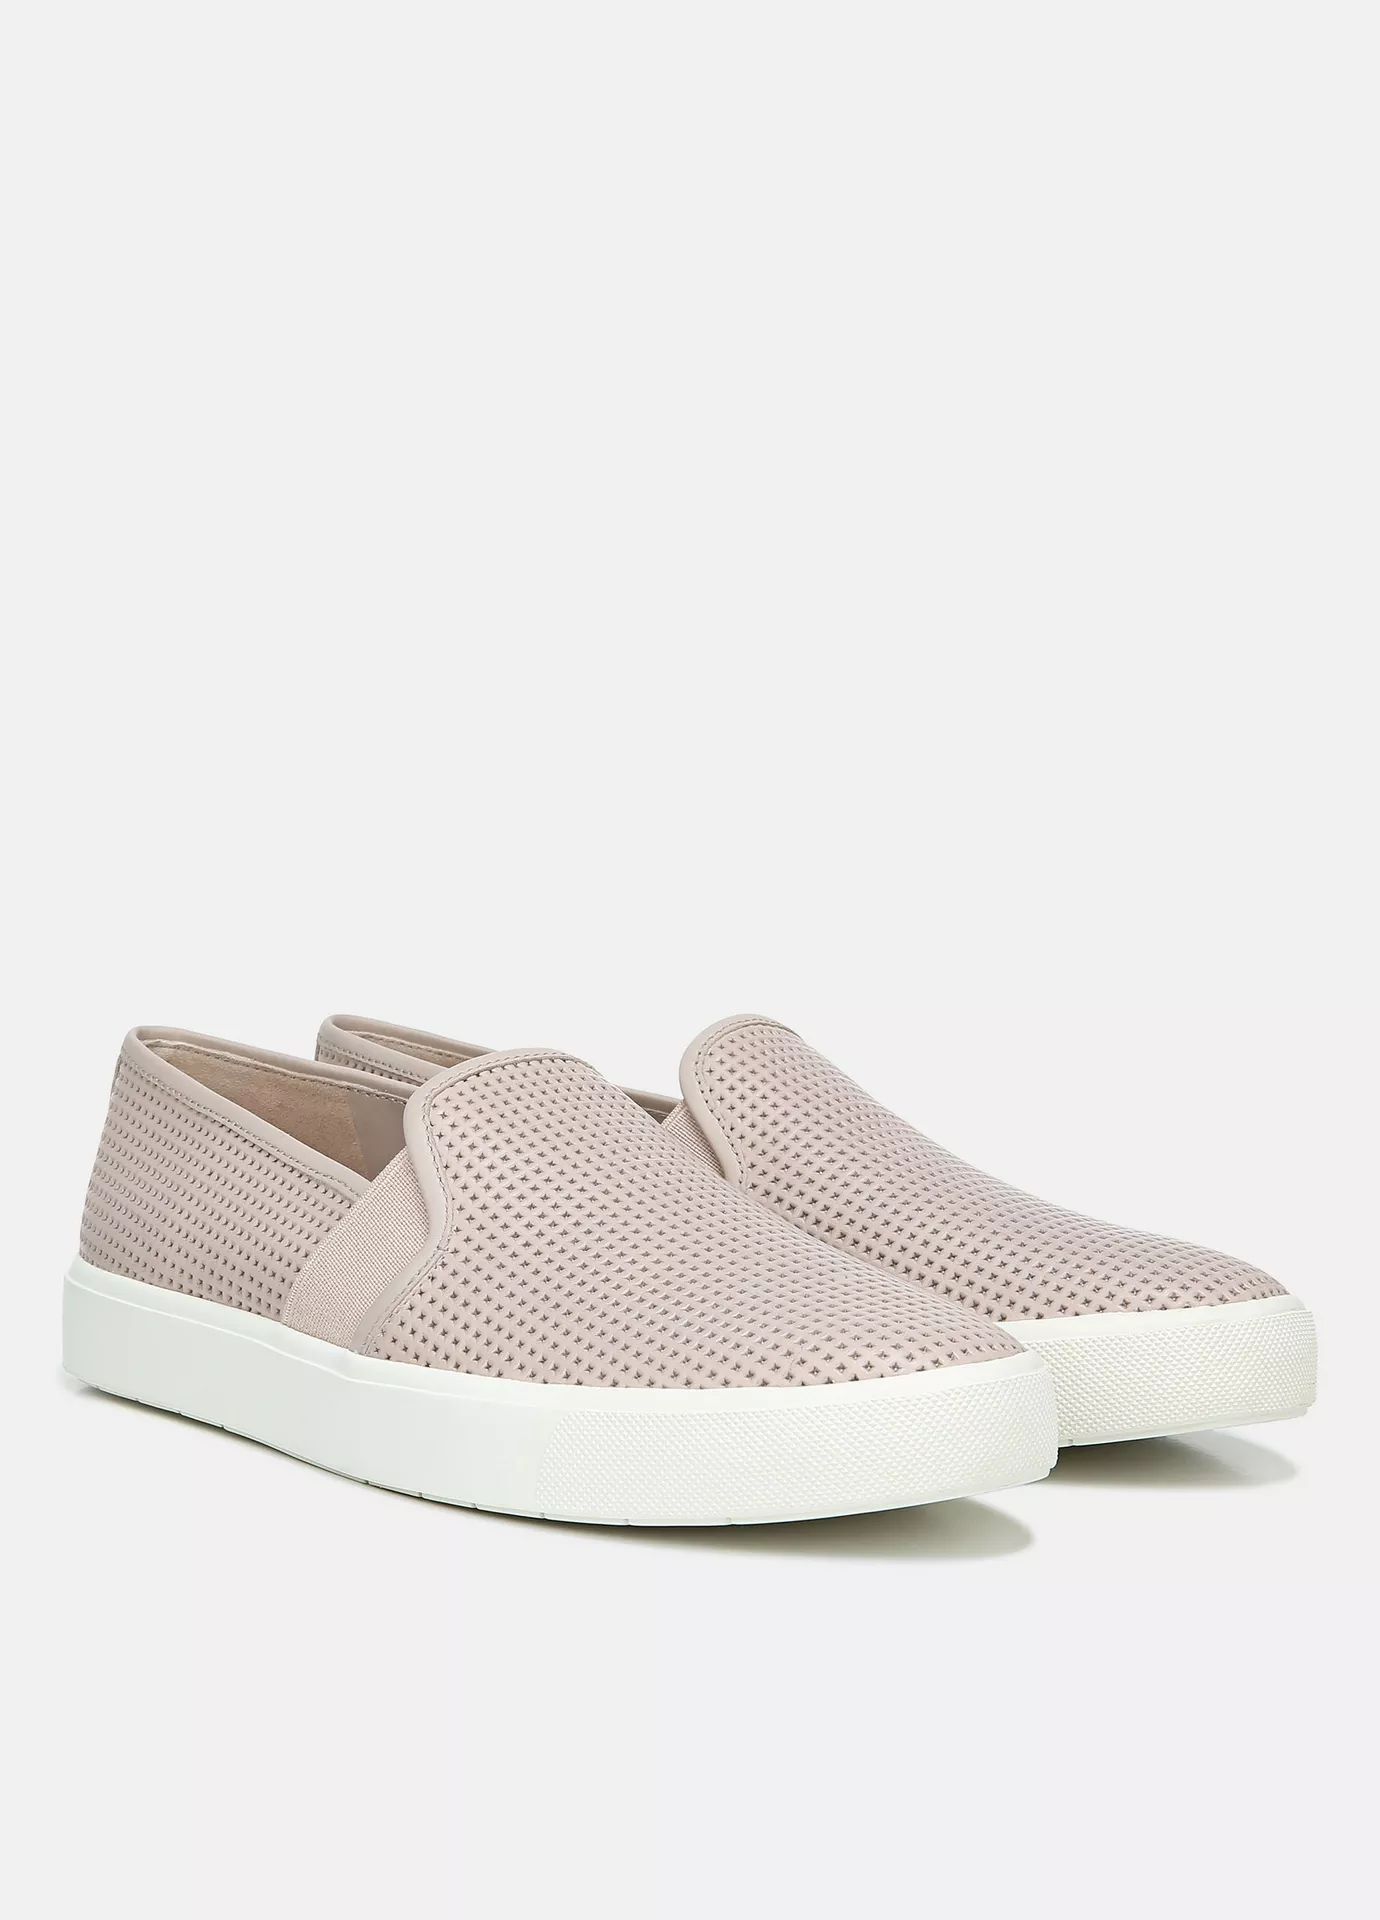 Perforated Leather Blair Sneaker | Vince LLC